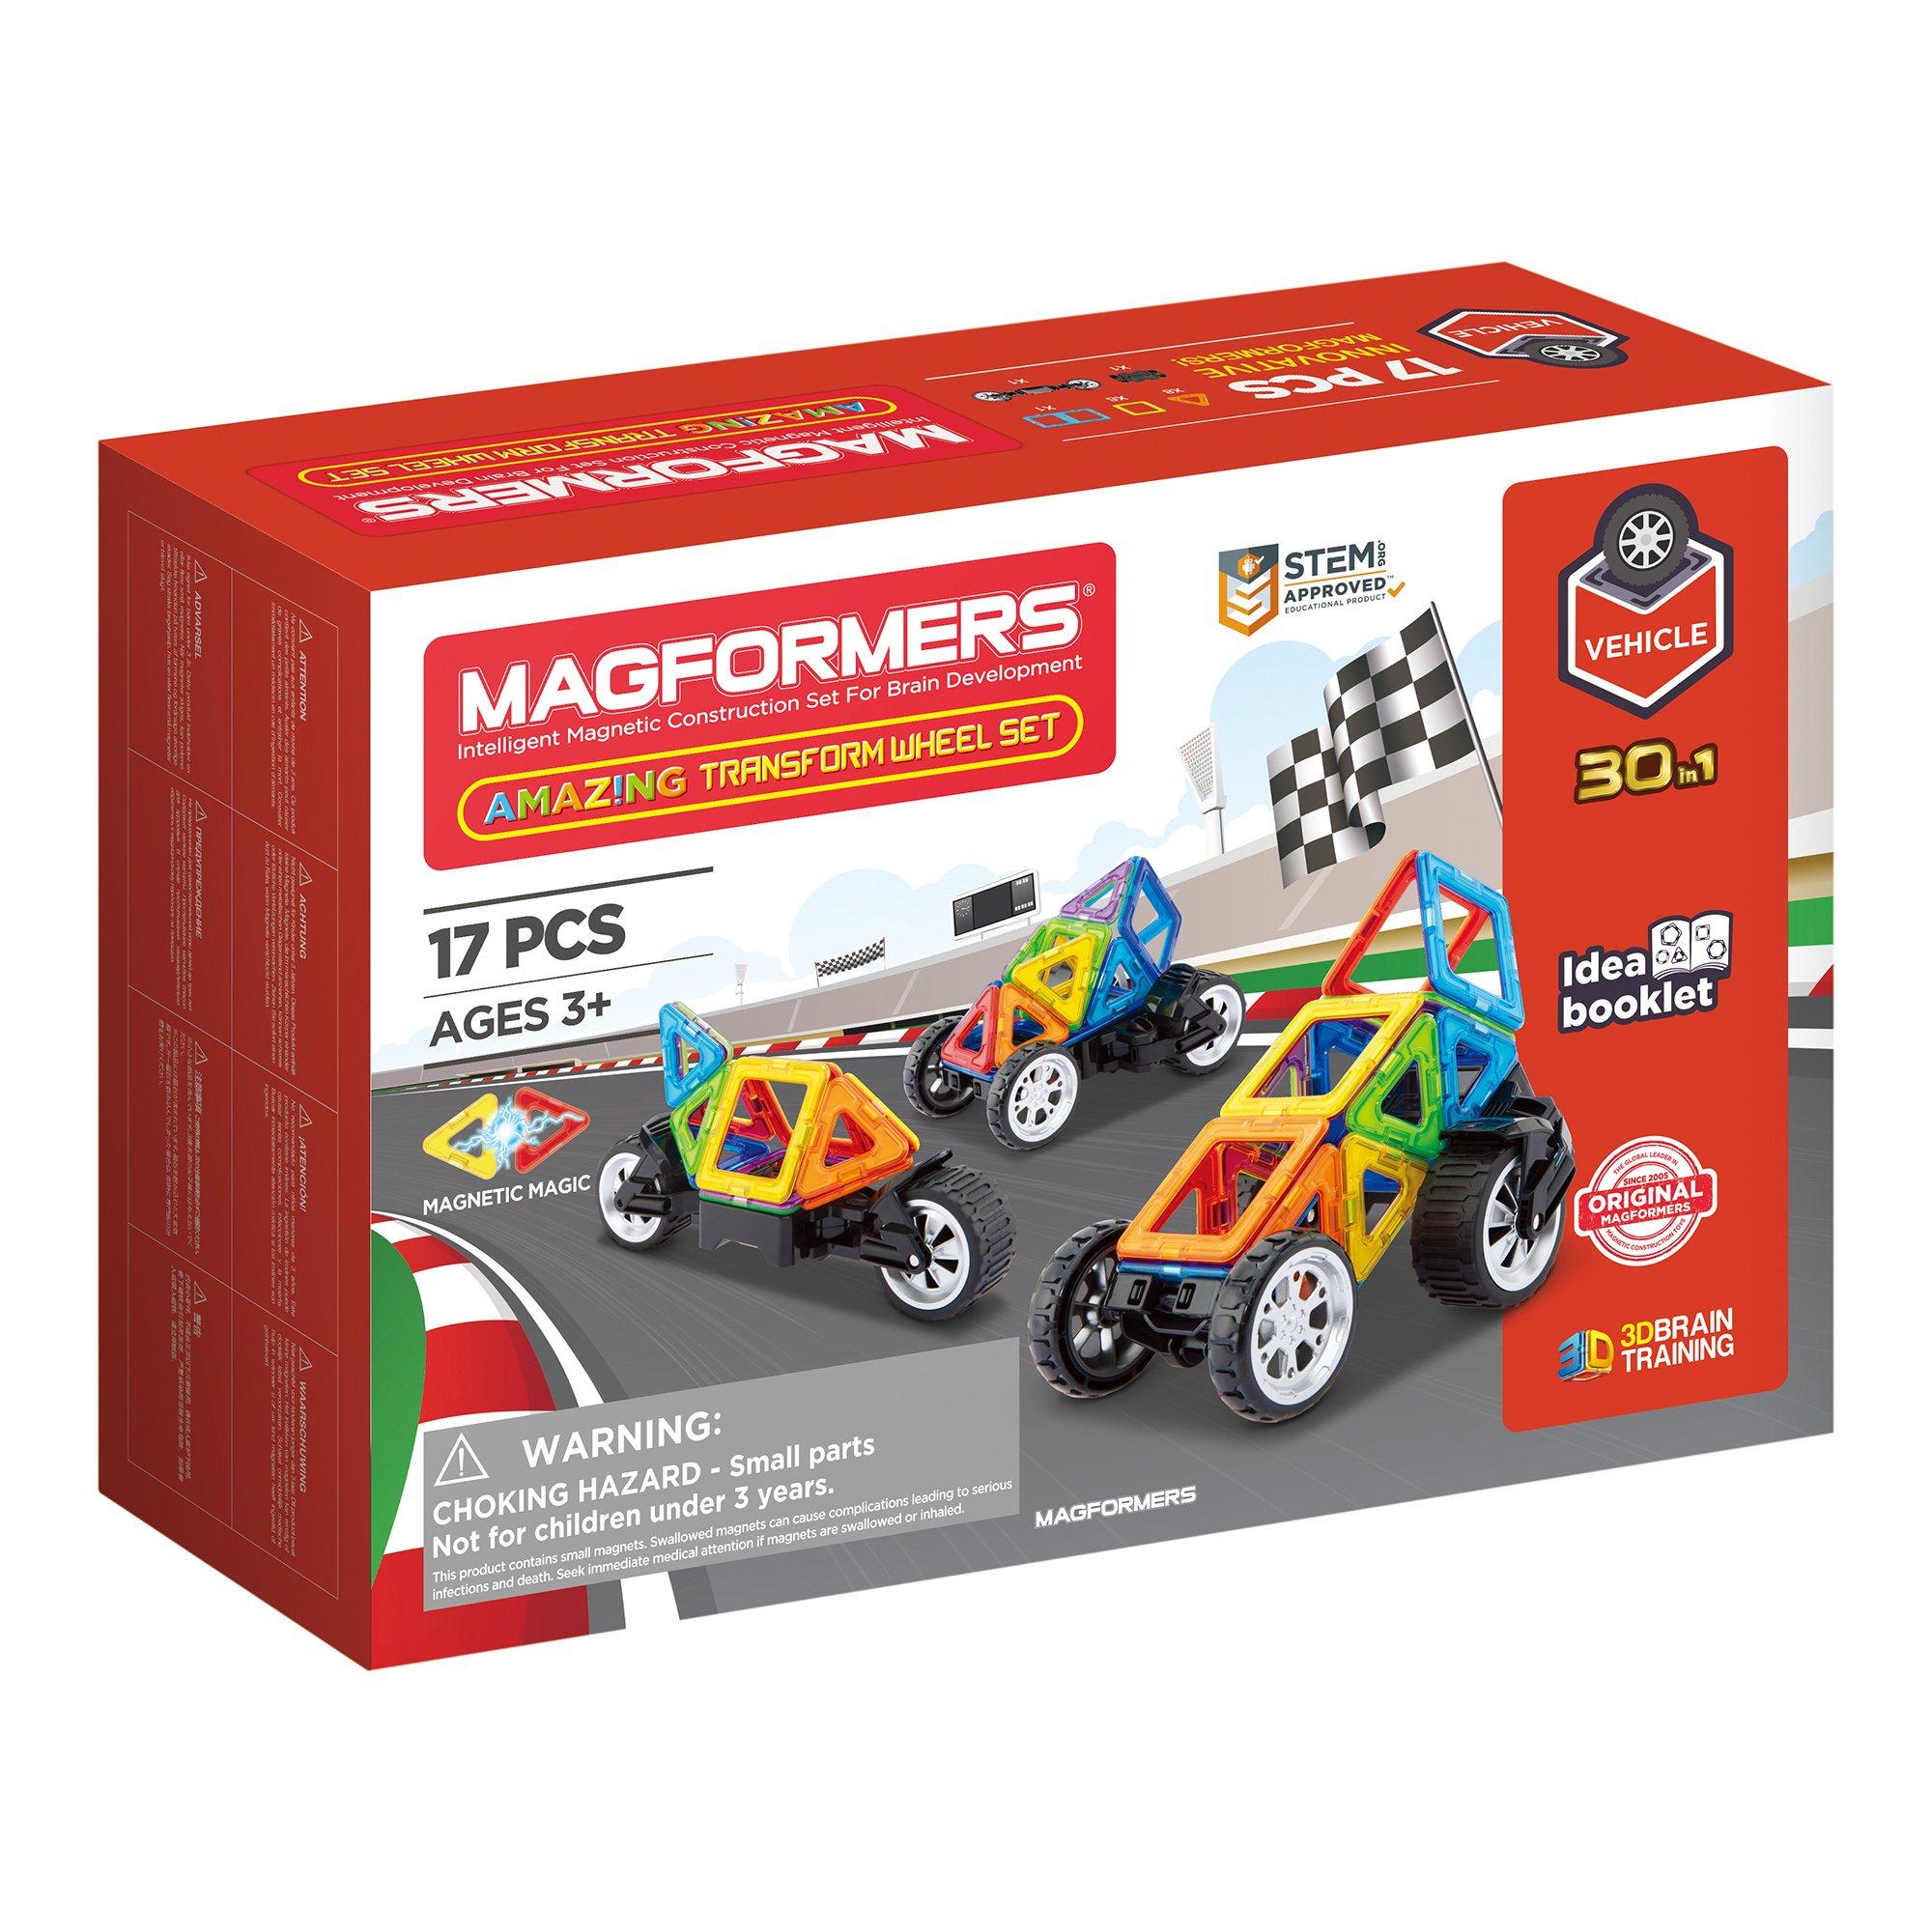 Image of MAGFORMERS Magformers Amazing Transform Wheel Set